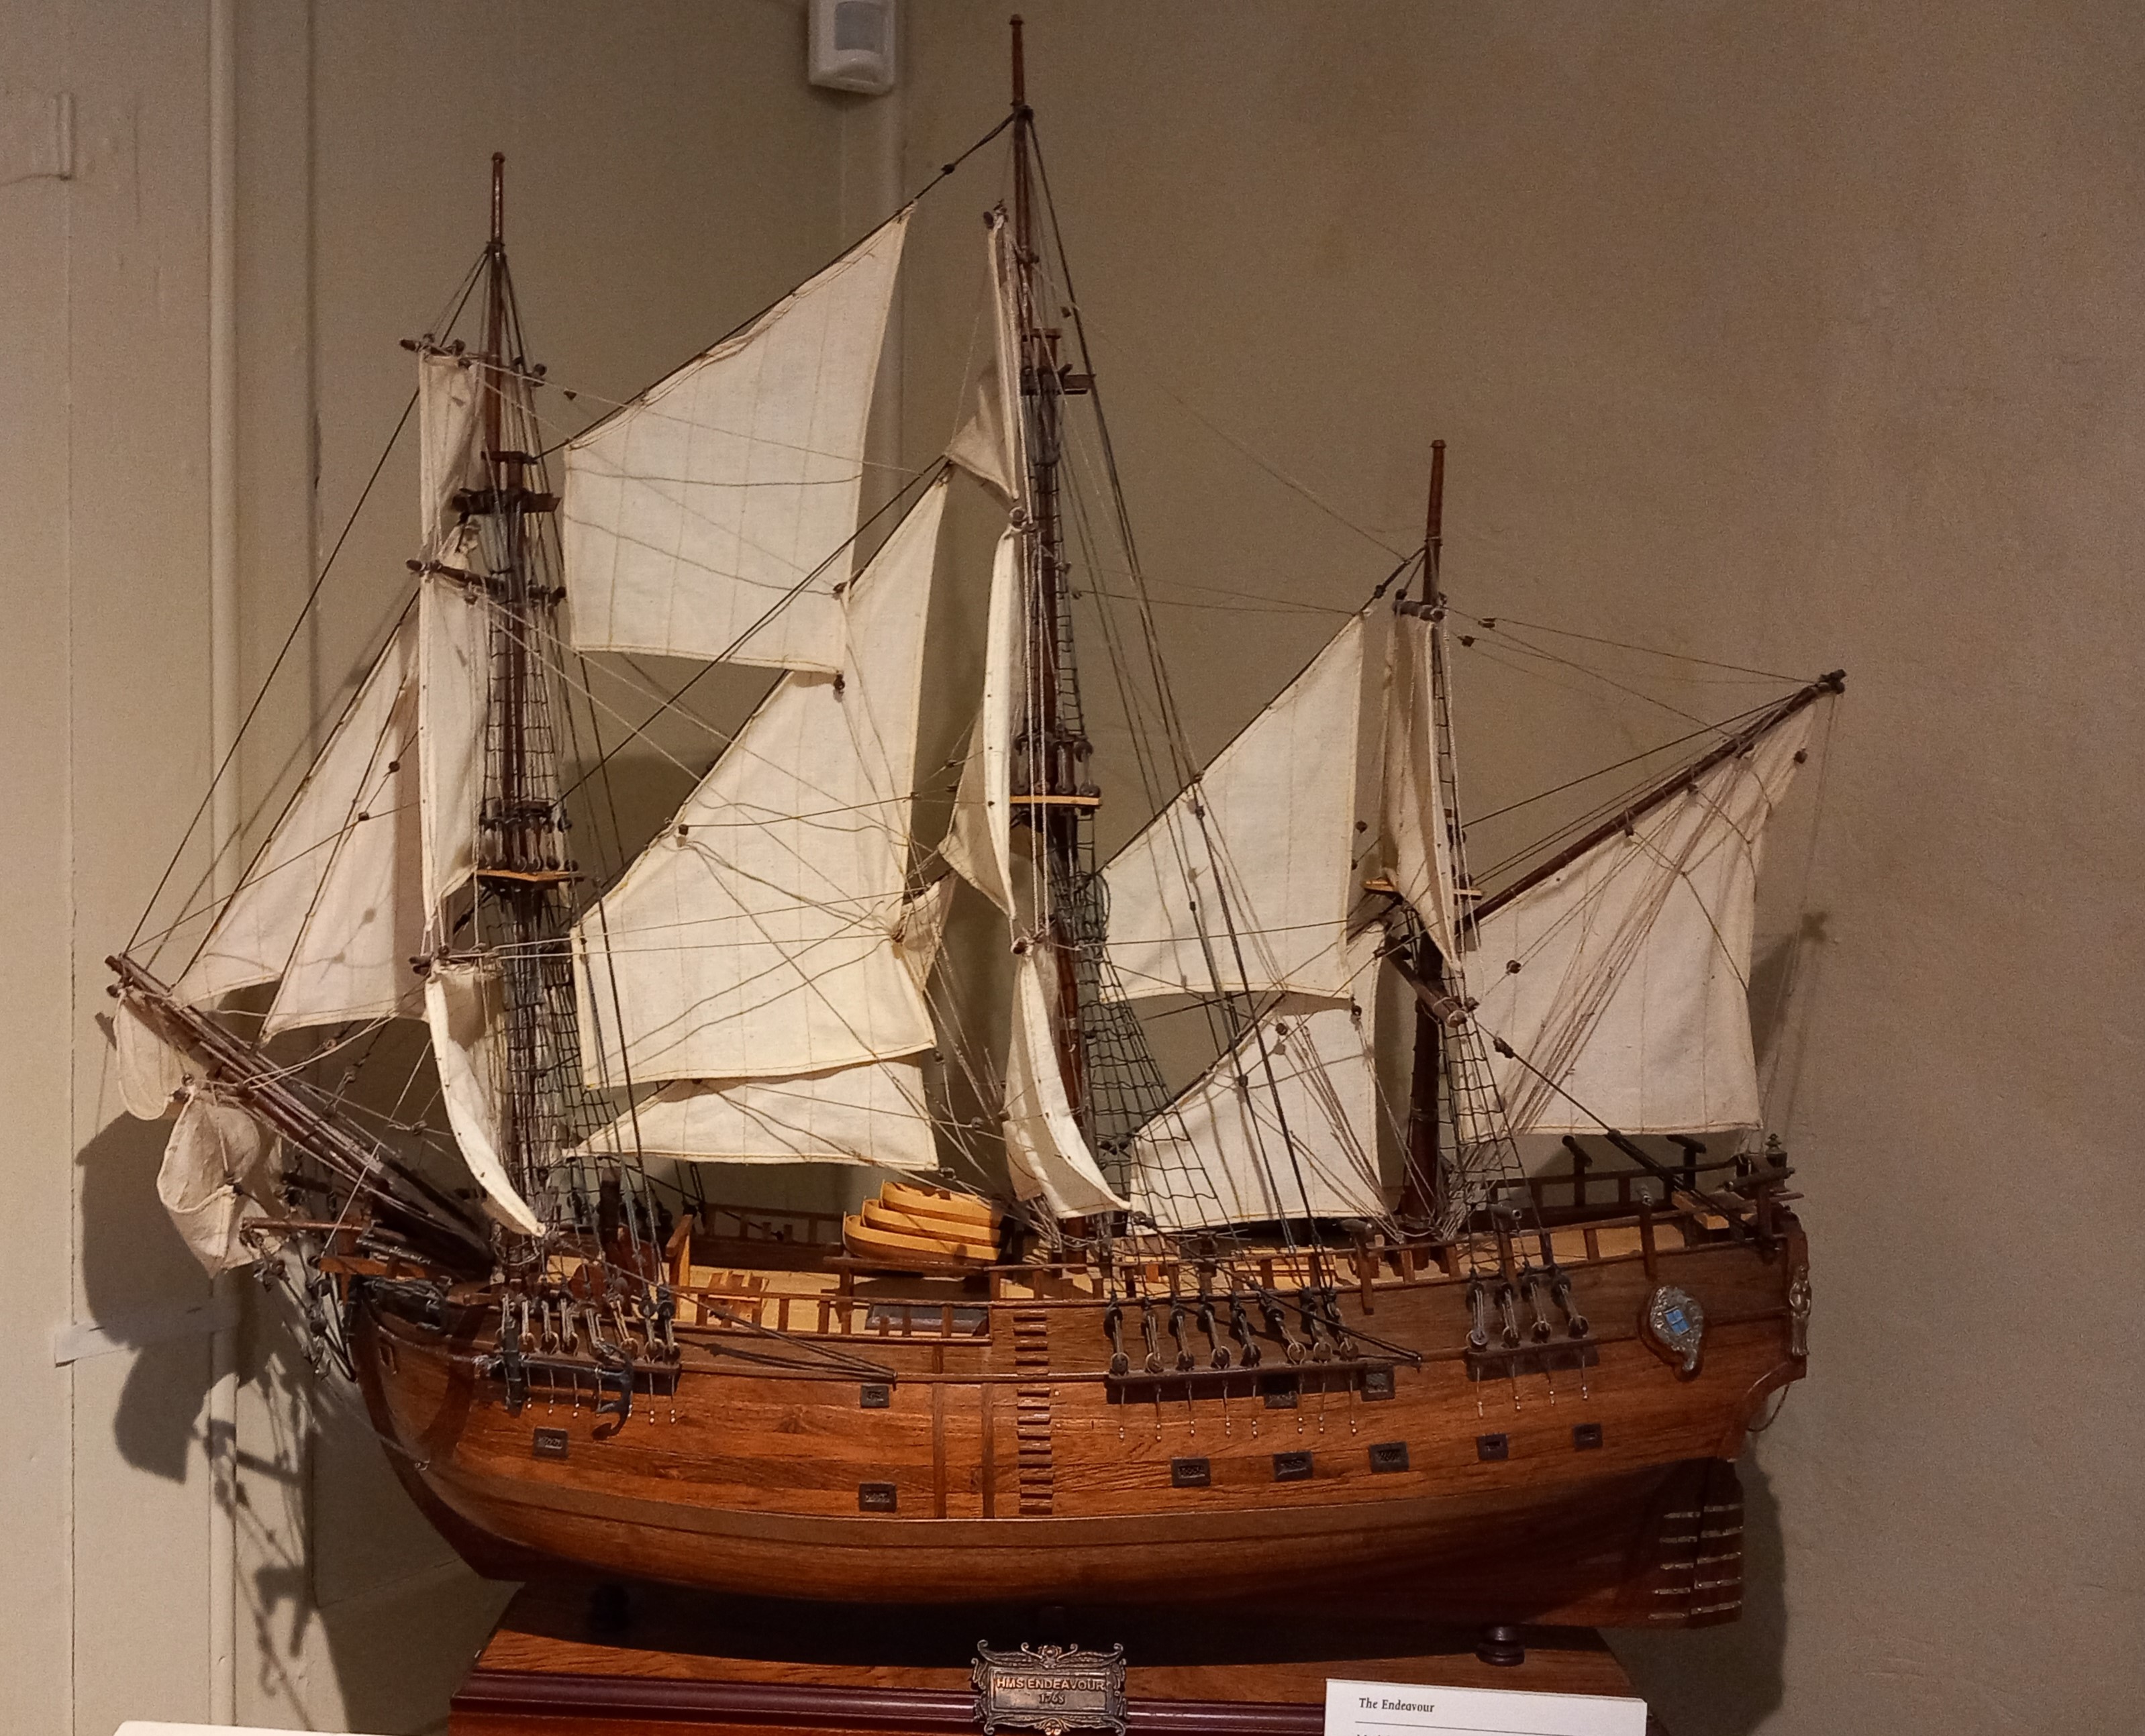 This photo shows a model of HM Endeavour